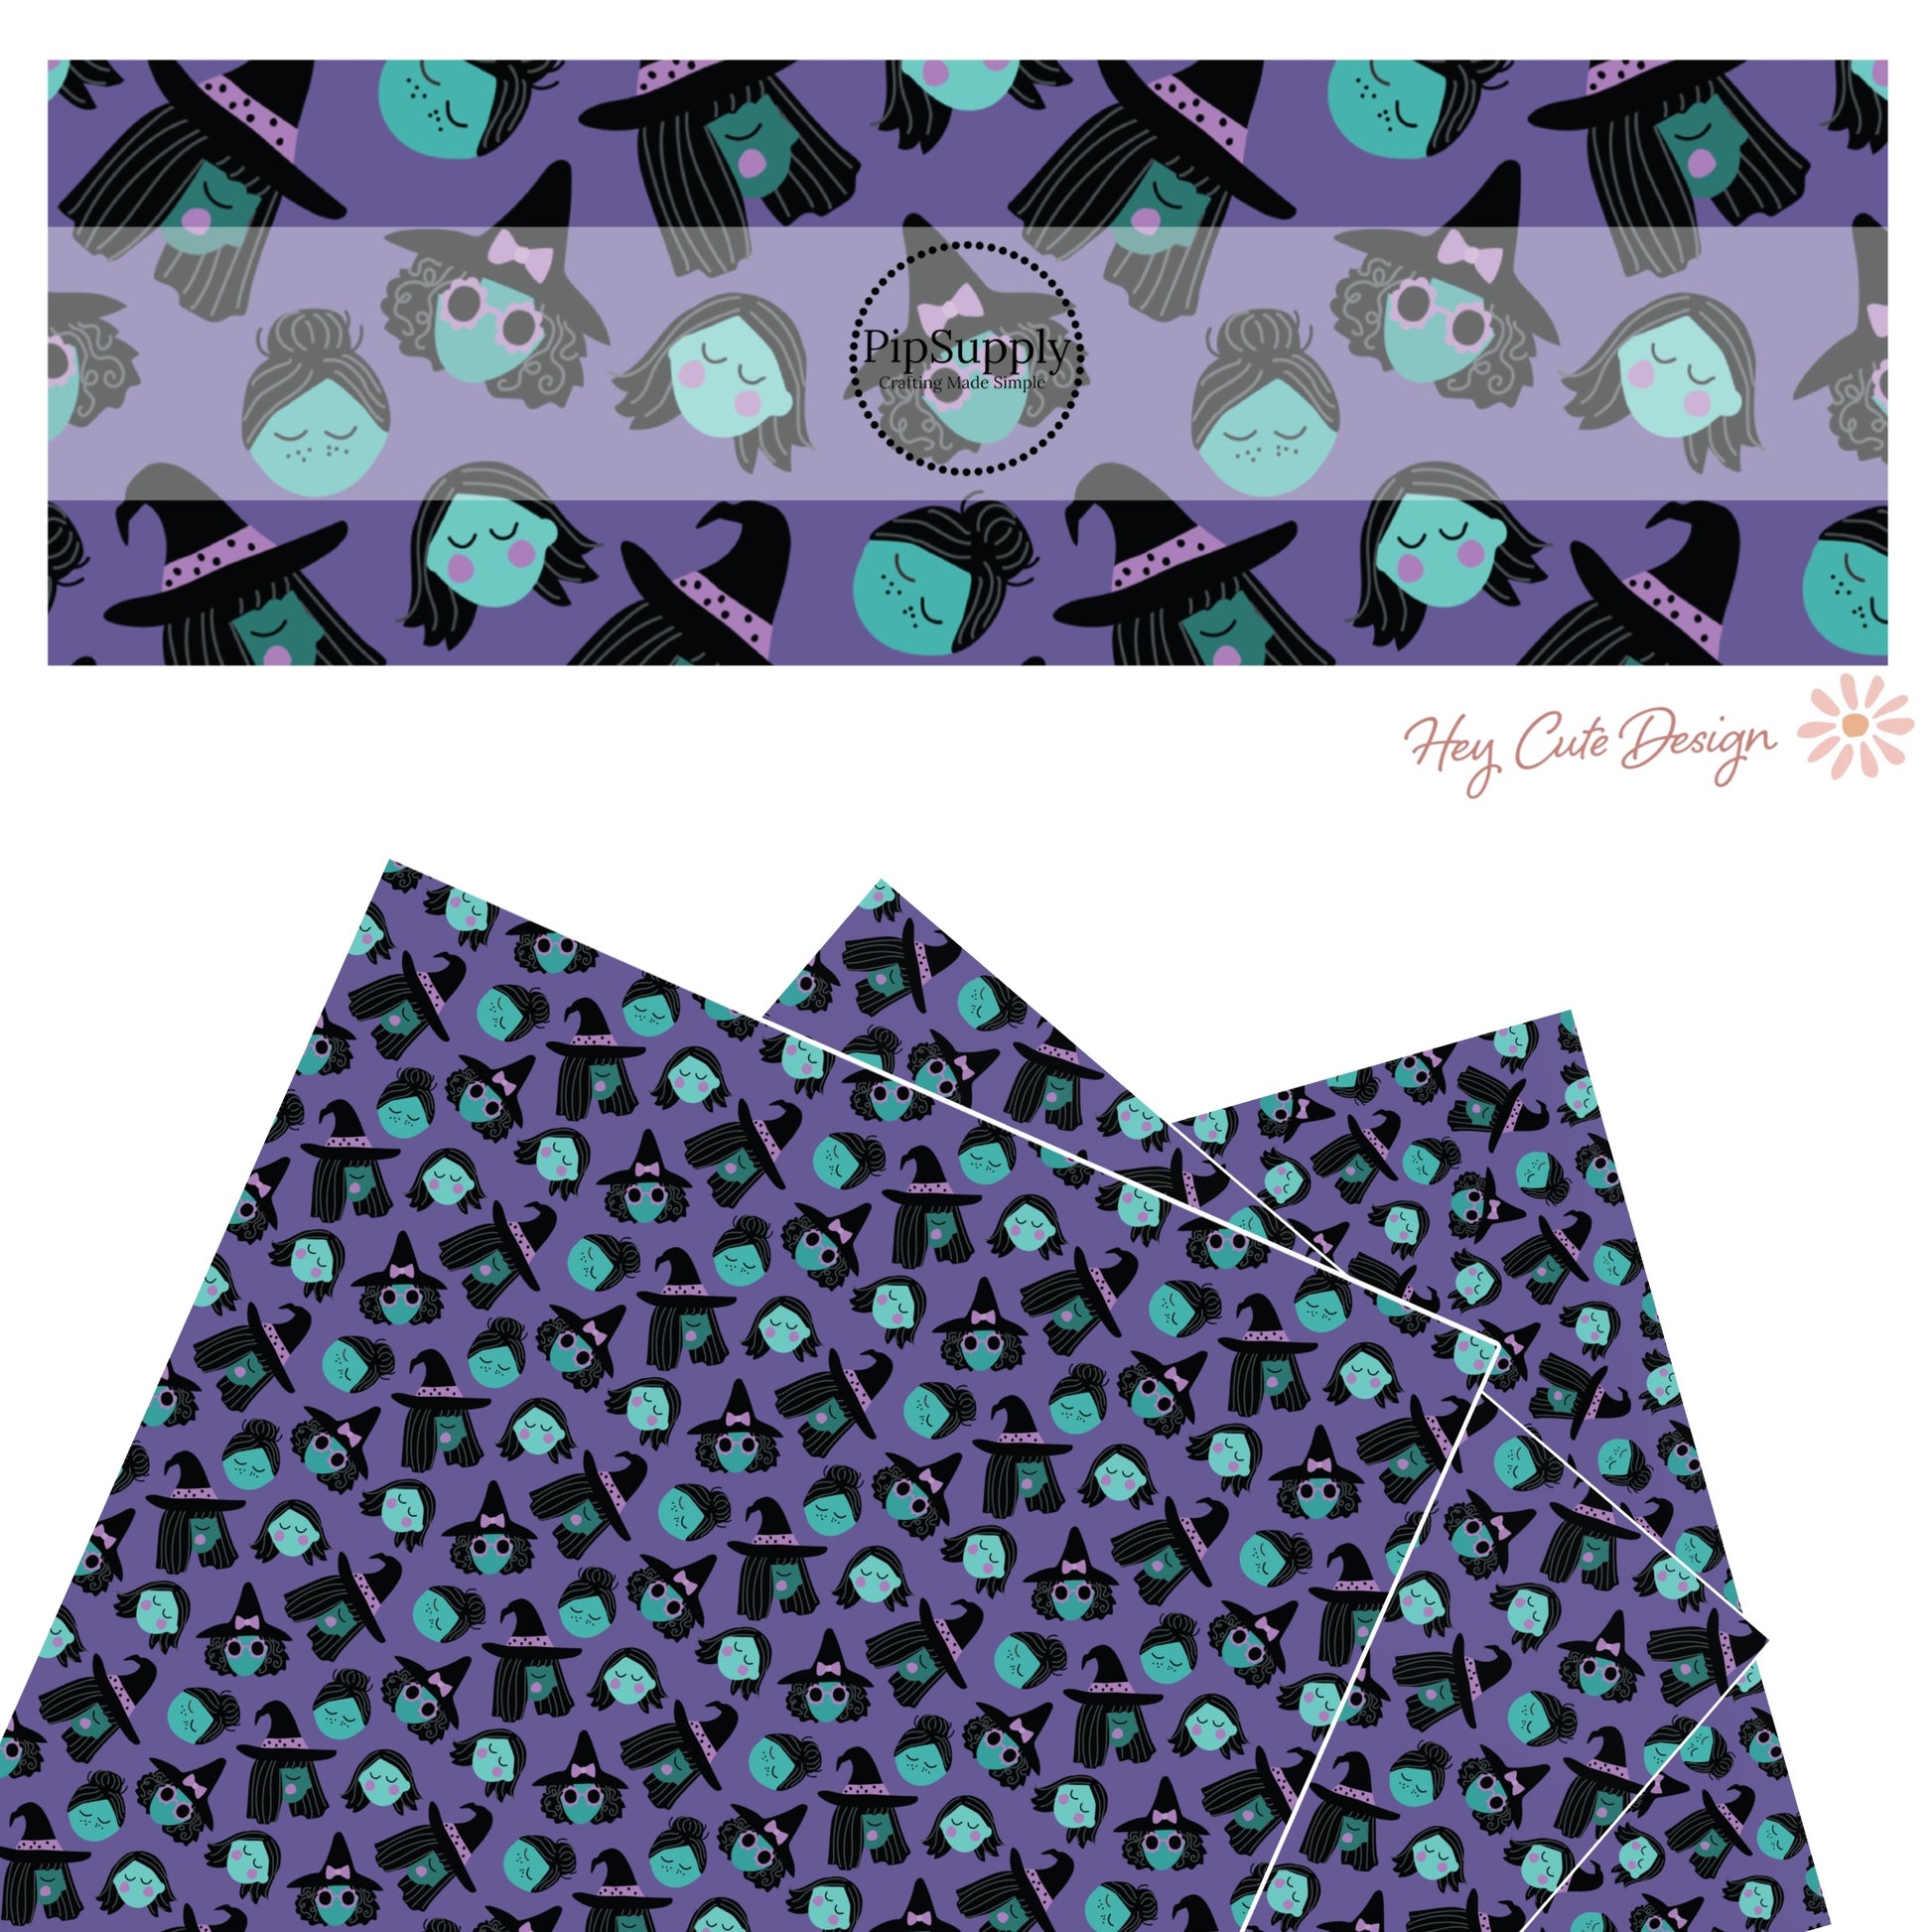 Witches with black hair and blue faces on purple faux leather sheets